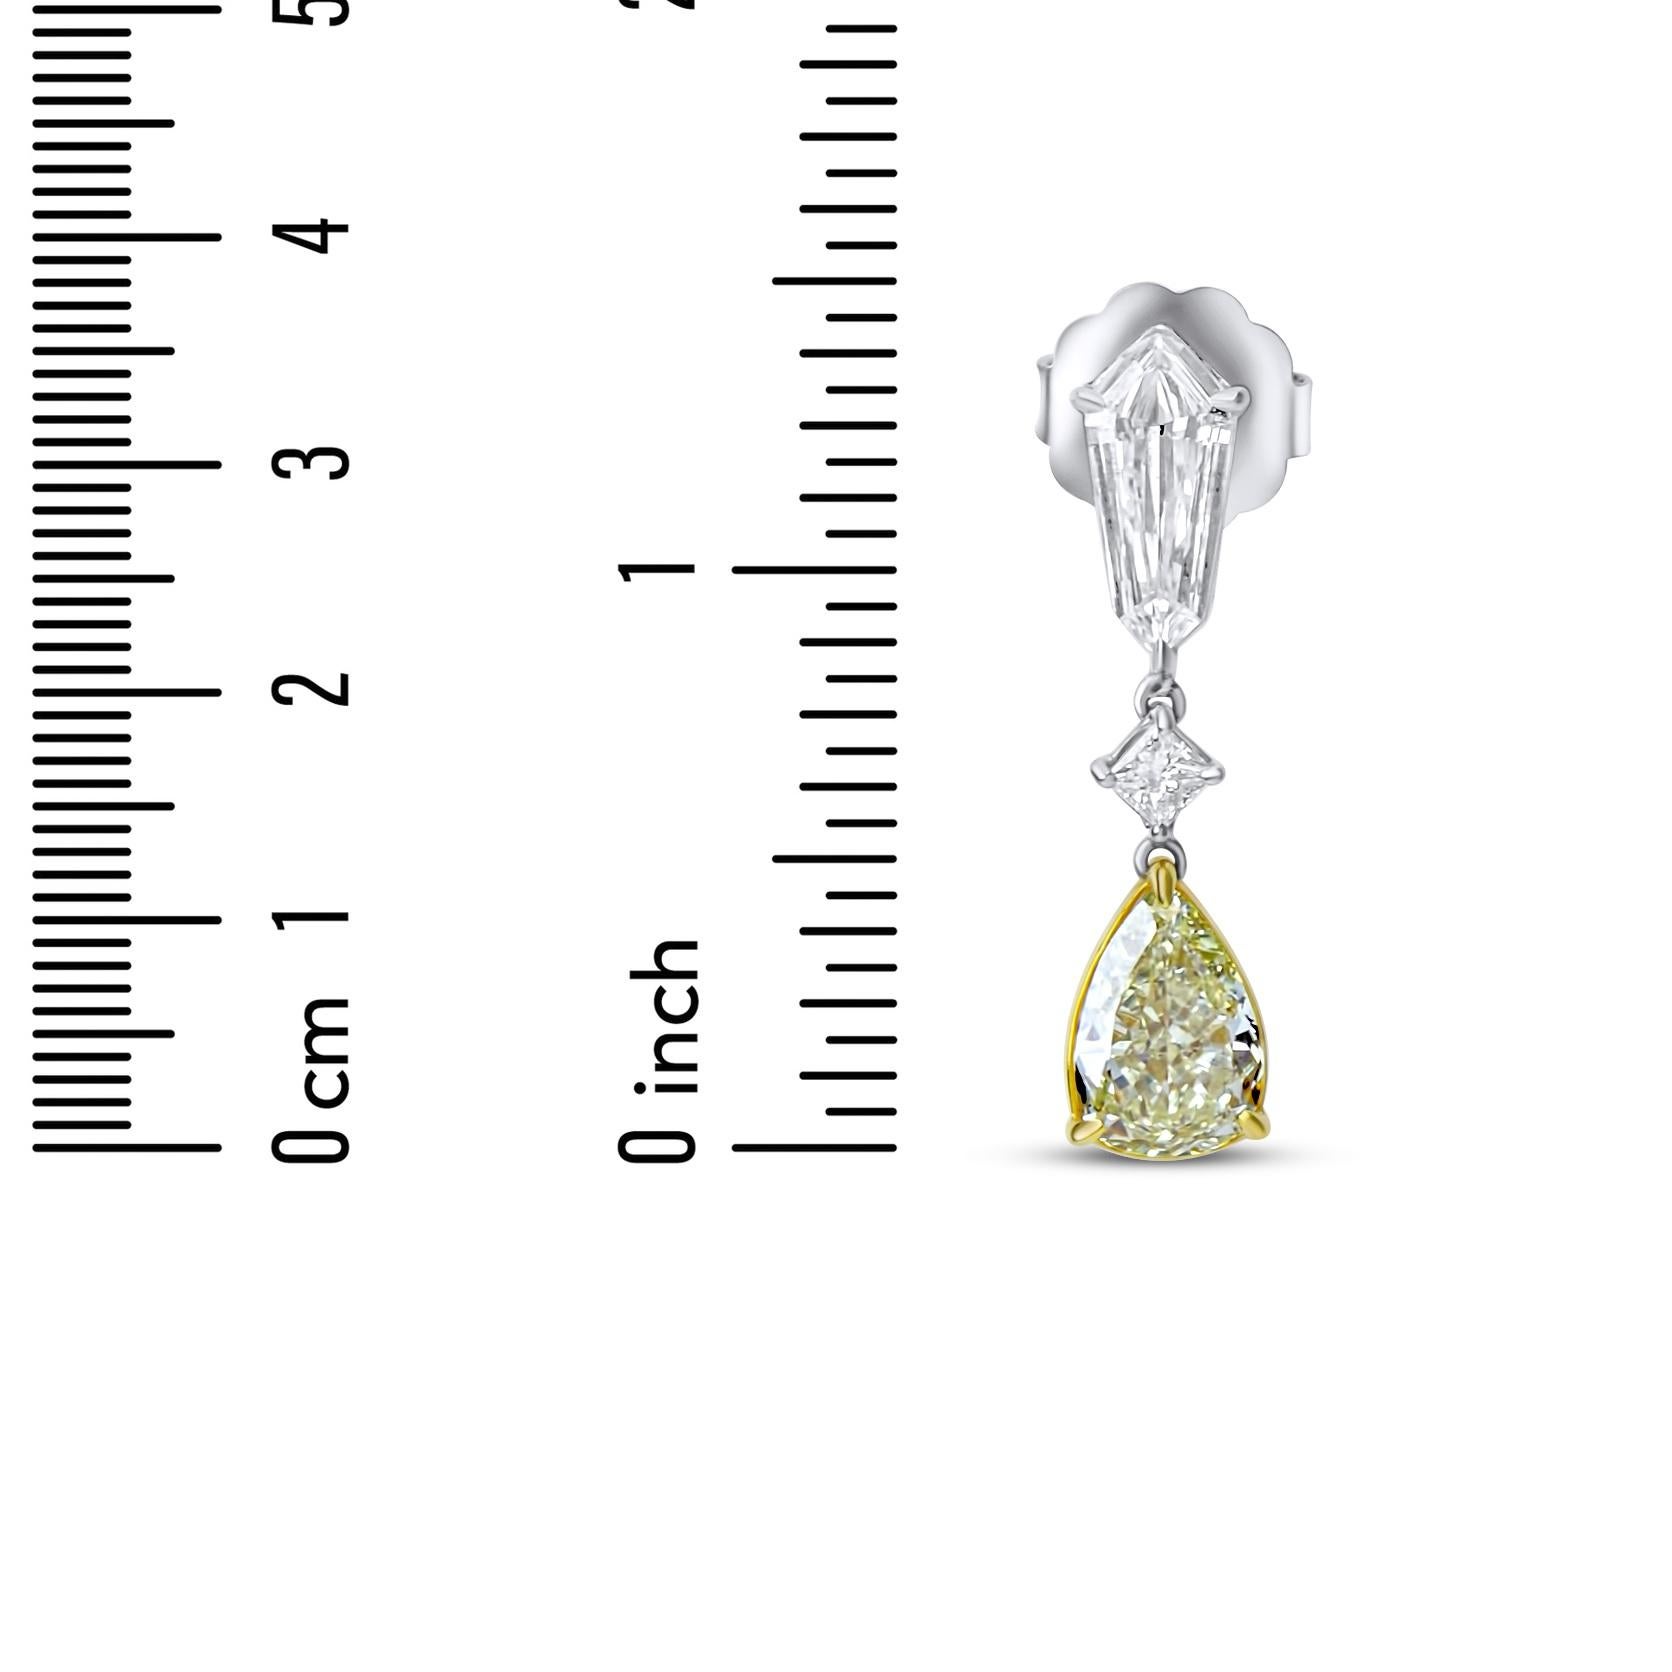 These exquisite dangle earrings feature a combination of kite and pear-shaped diamonds, elegantly connected by a princess-cut diamond. The left and right sides display a mirrored design with contrasting yellow and white patterns. 

Kite shape